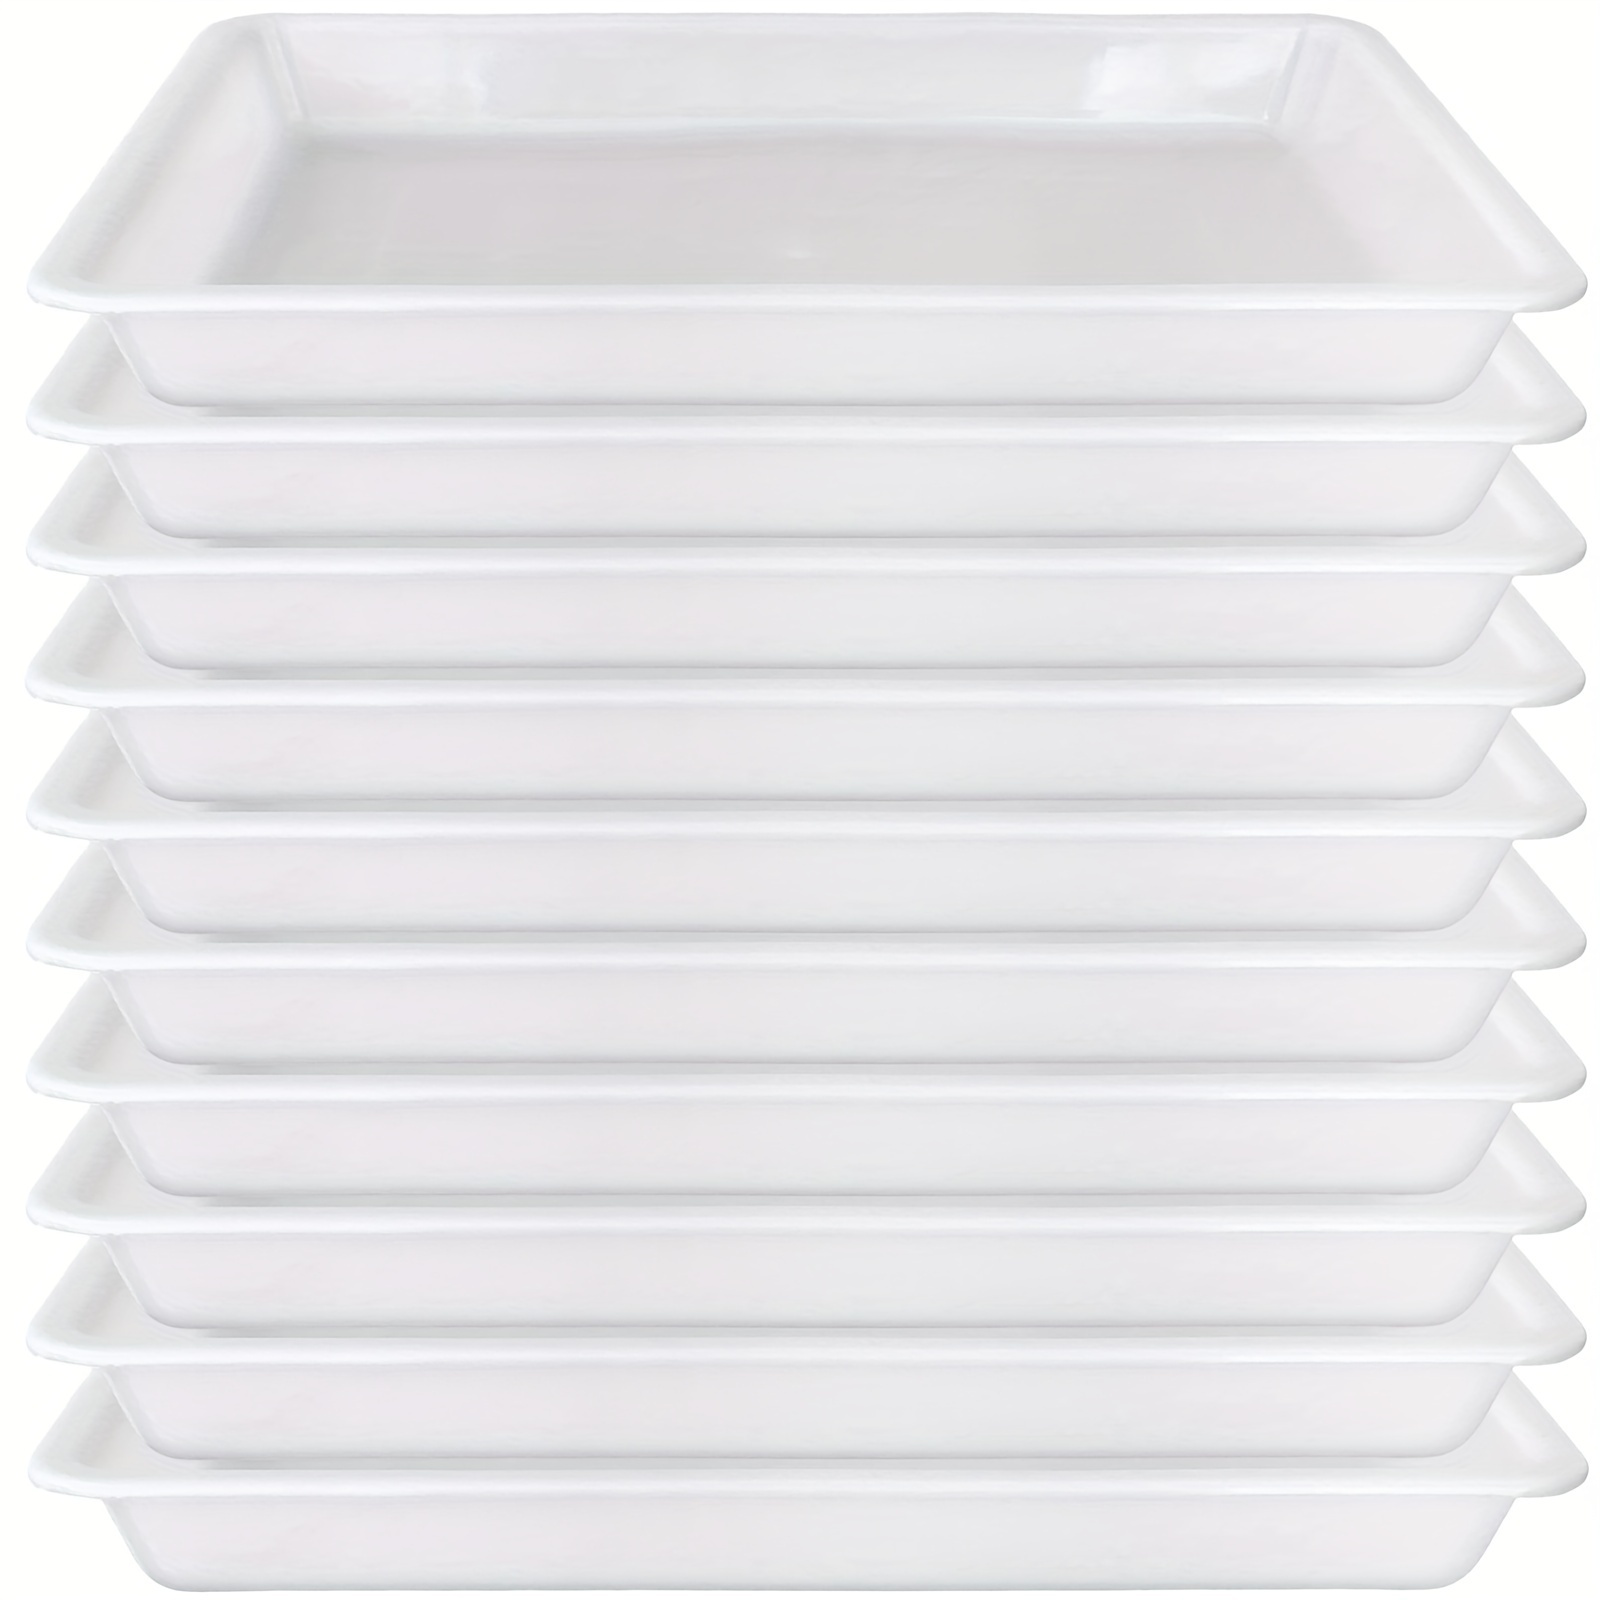 

10-piece White Plastic Art Trays For Crafts, Diy Projects & School Organization - Durable Pp Material Boost Your Diy Game